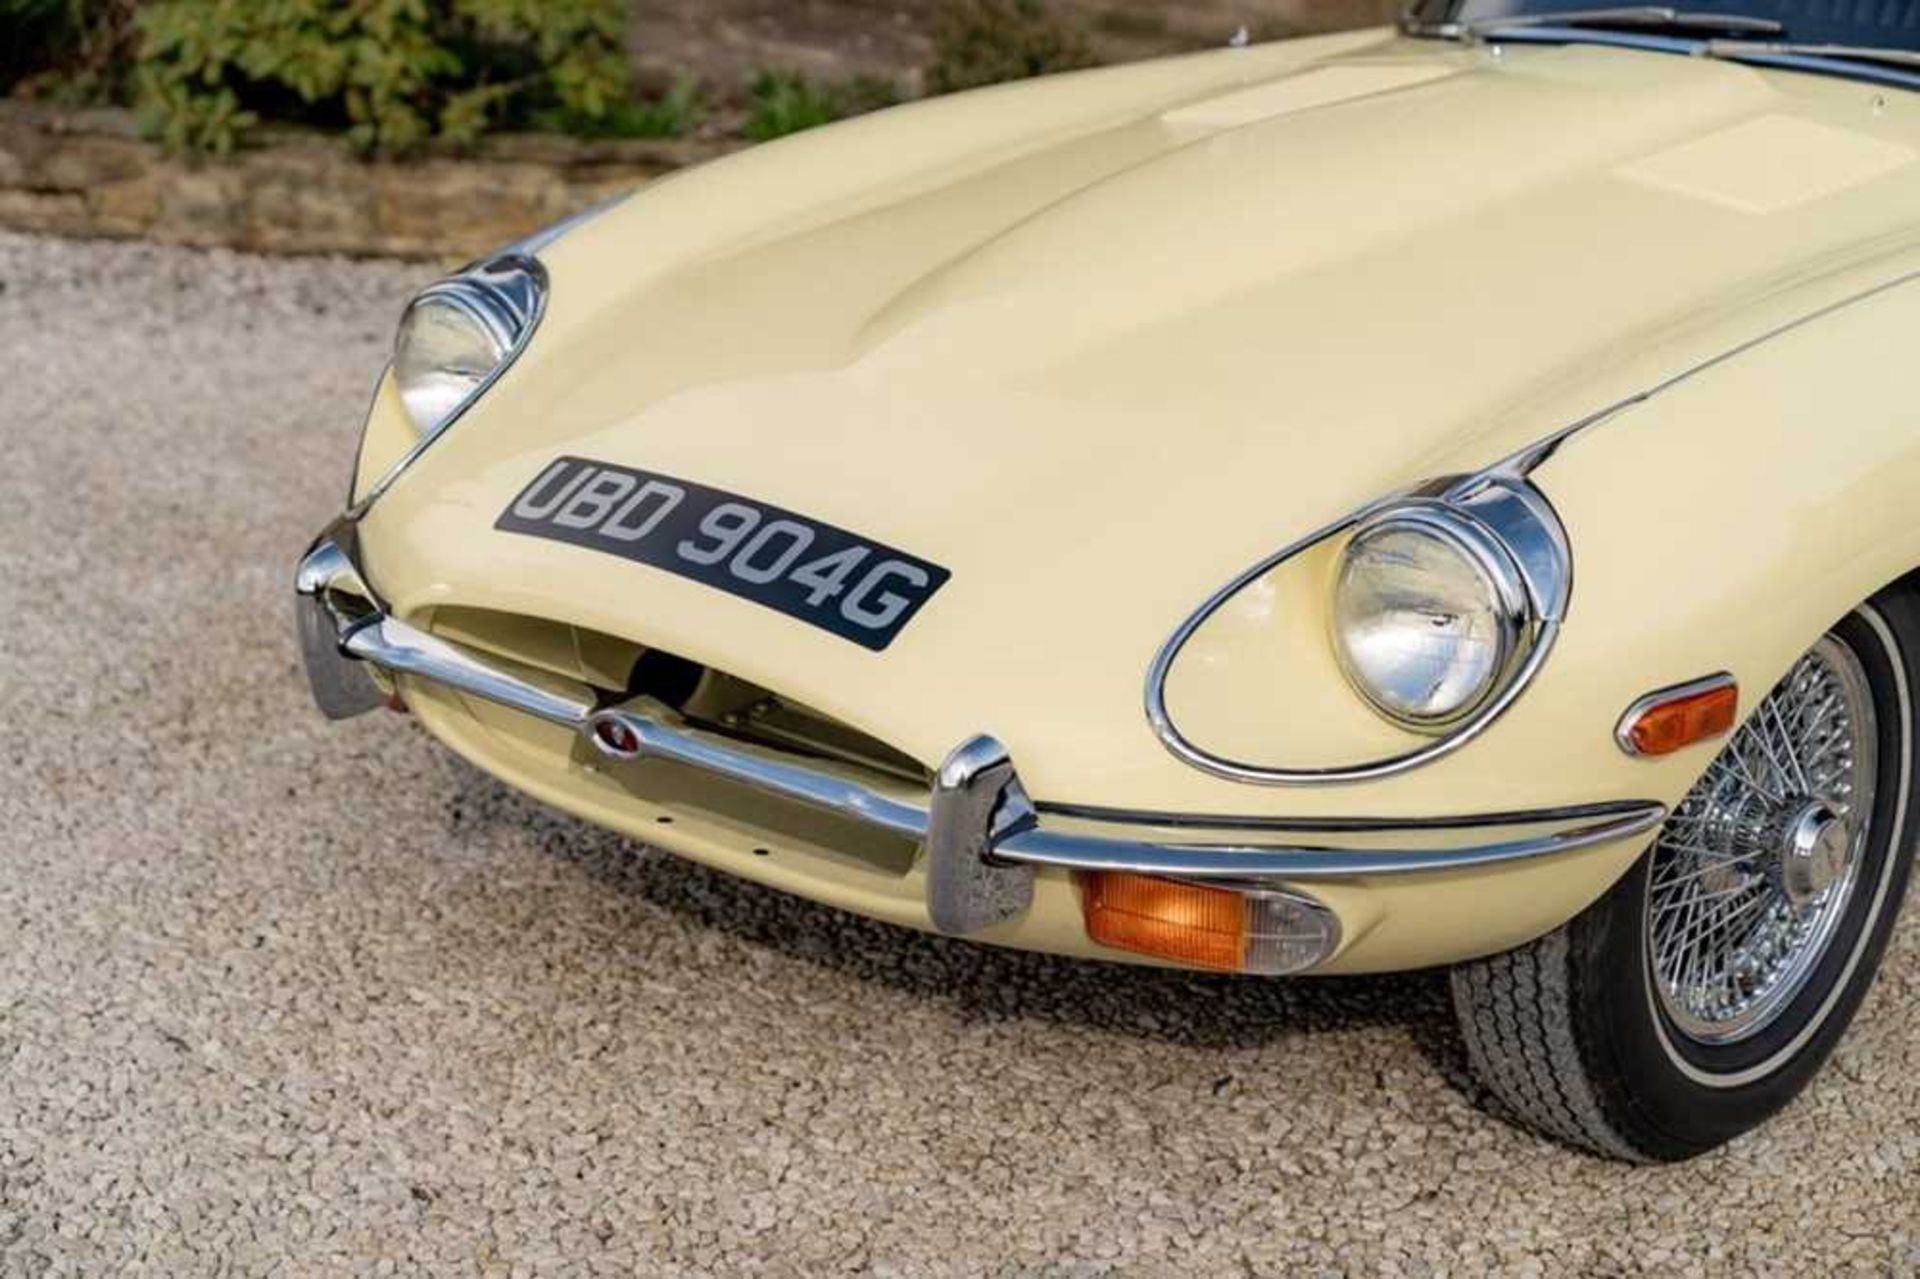 1968 Jaguar E-Type 4.2 Litre Coupe Genuine 44,000 miles from new - Image 30 of 68